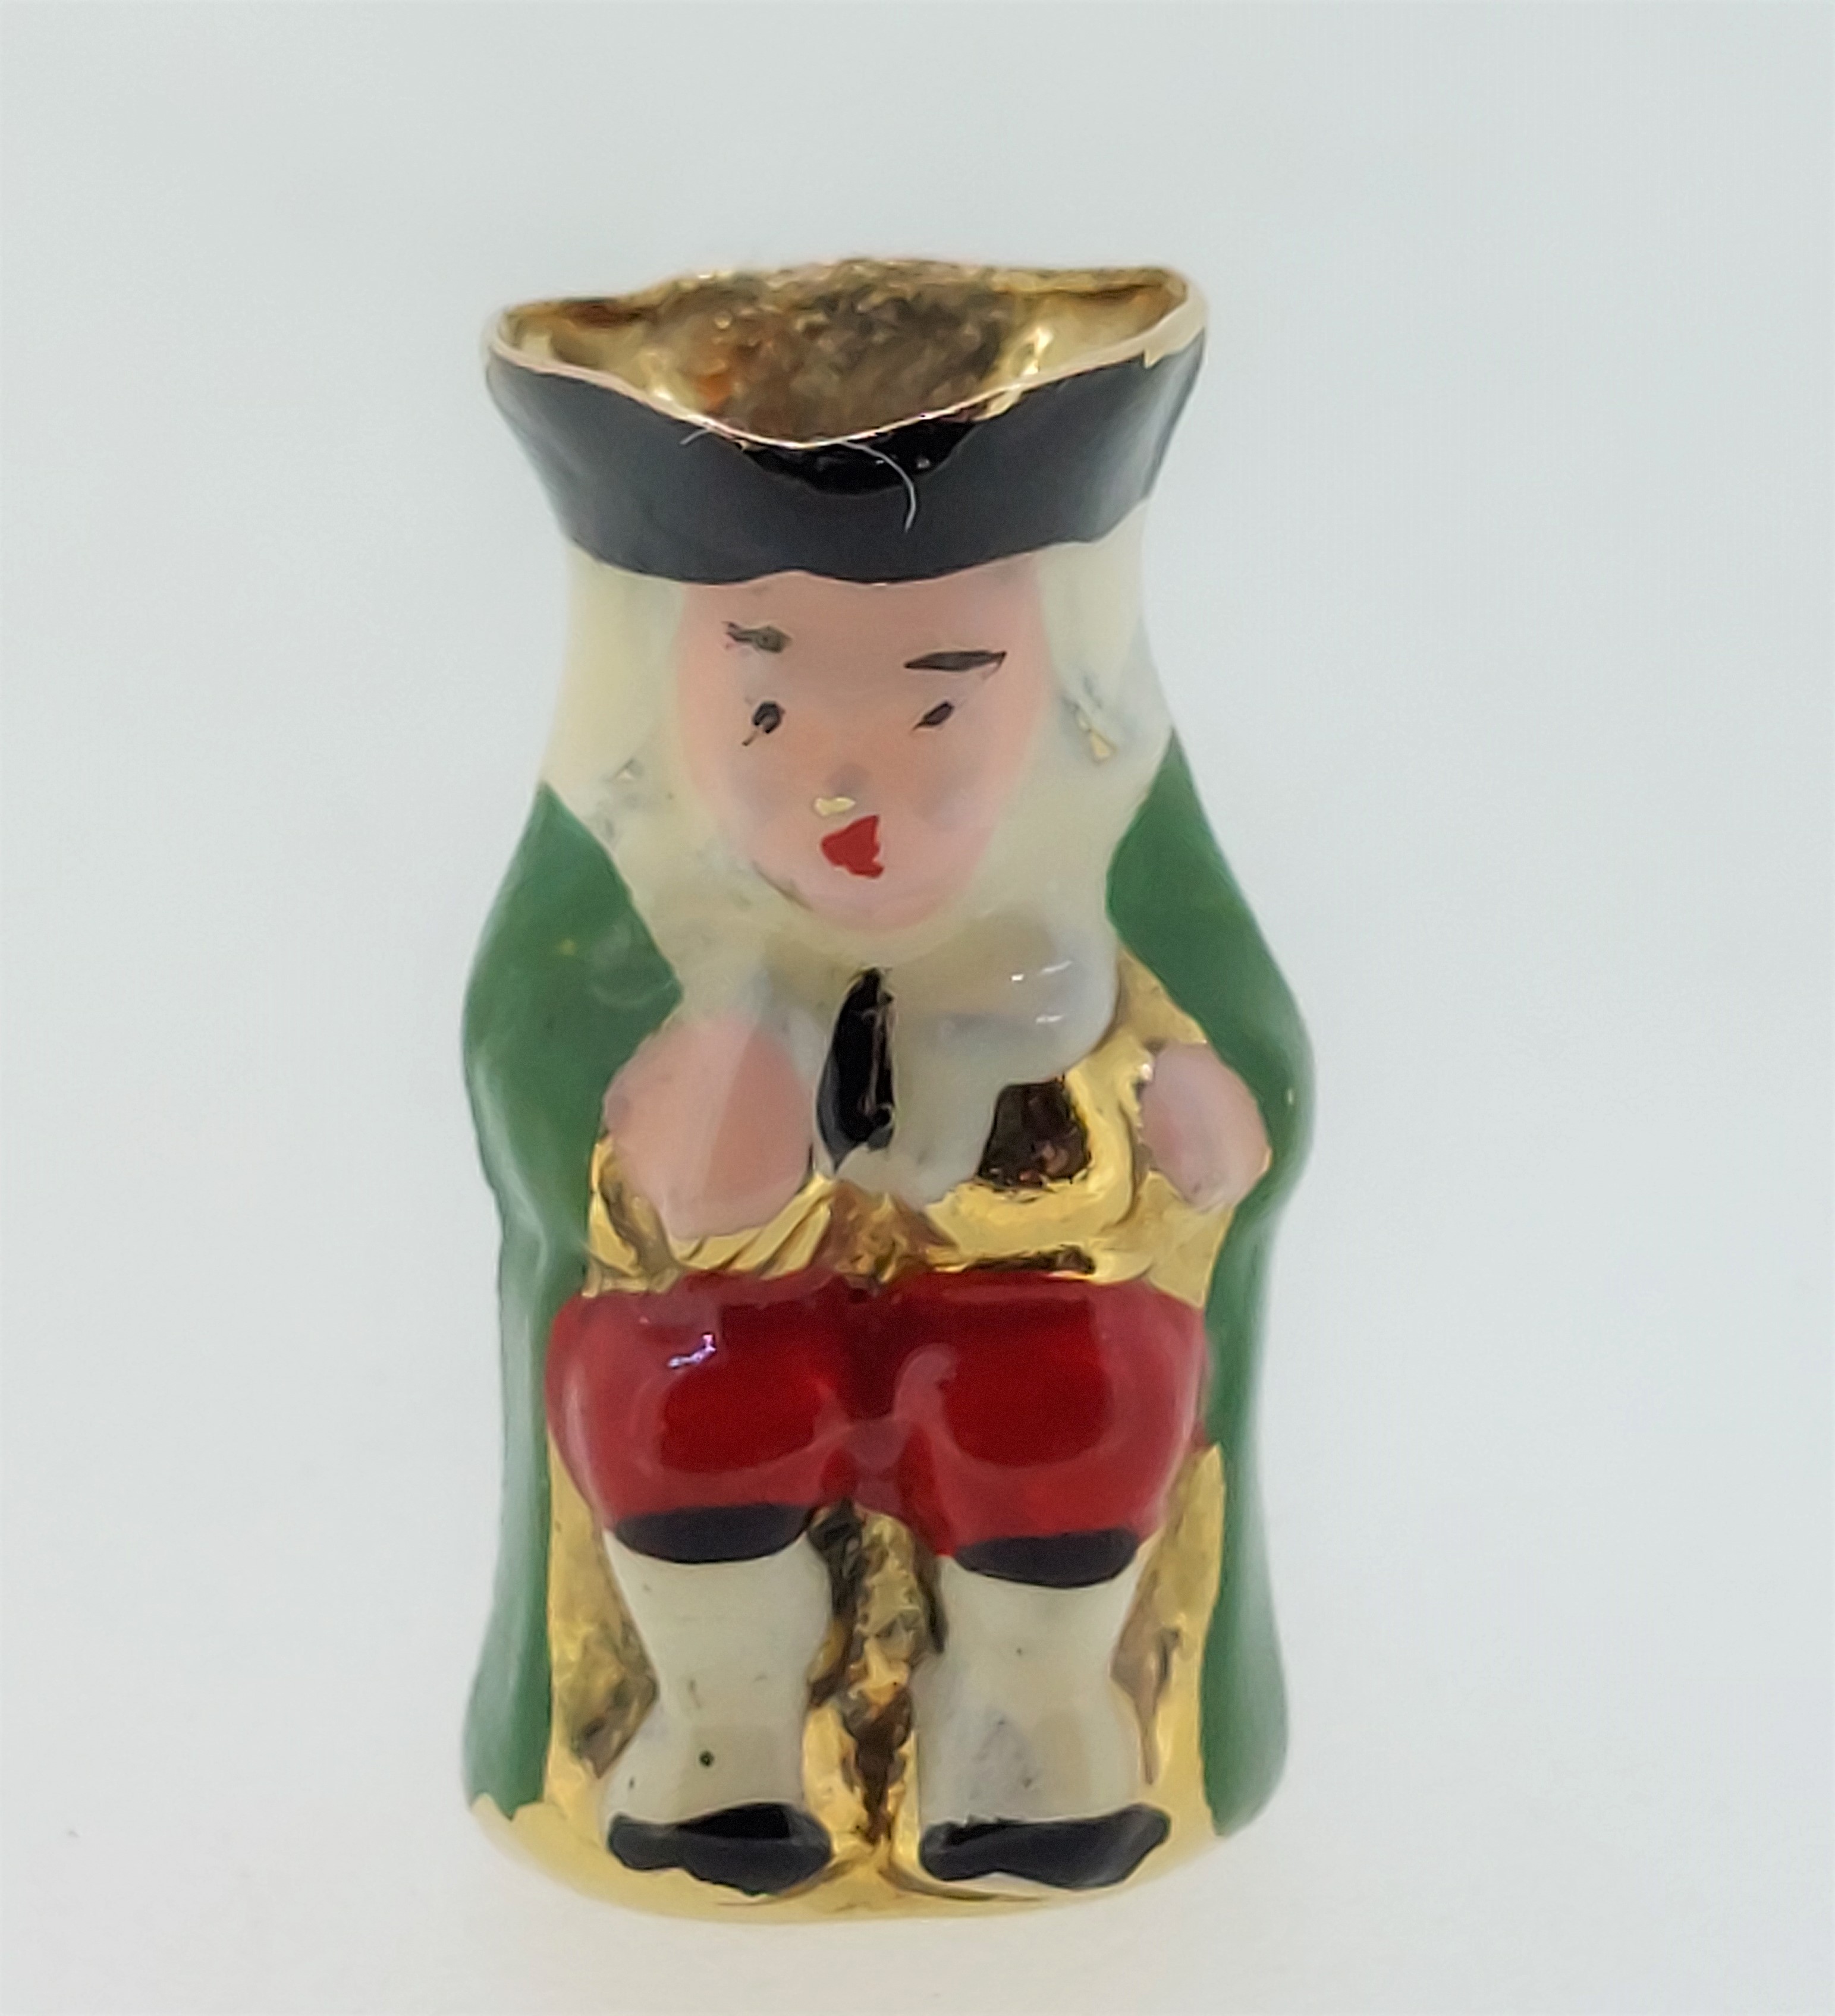 9ct Yellow Gold (375) Enamelled Toby Jug Charm Pendant - Image 7 of 8